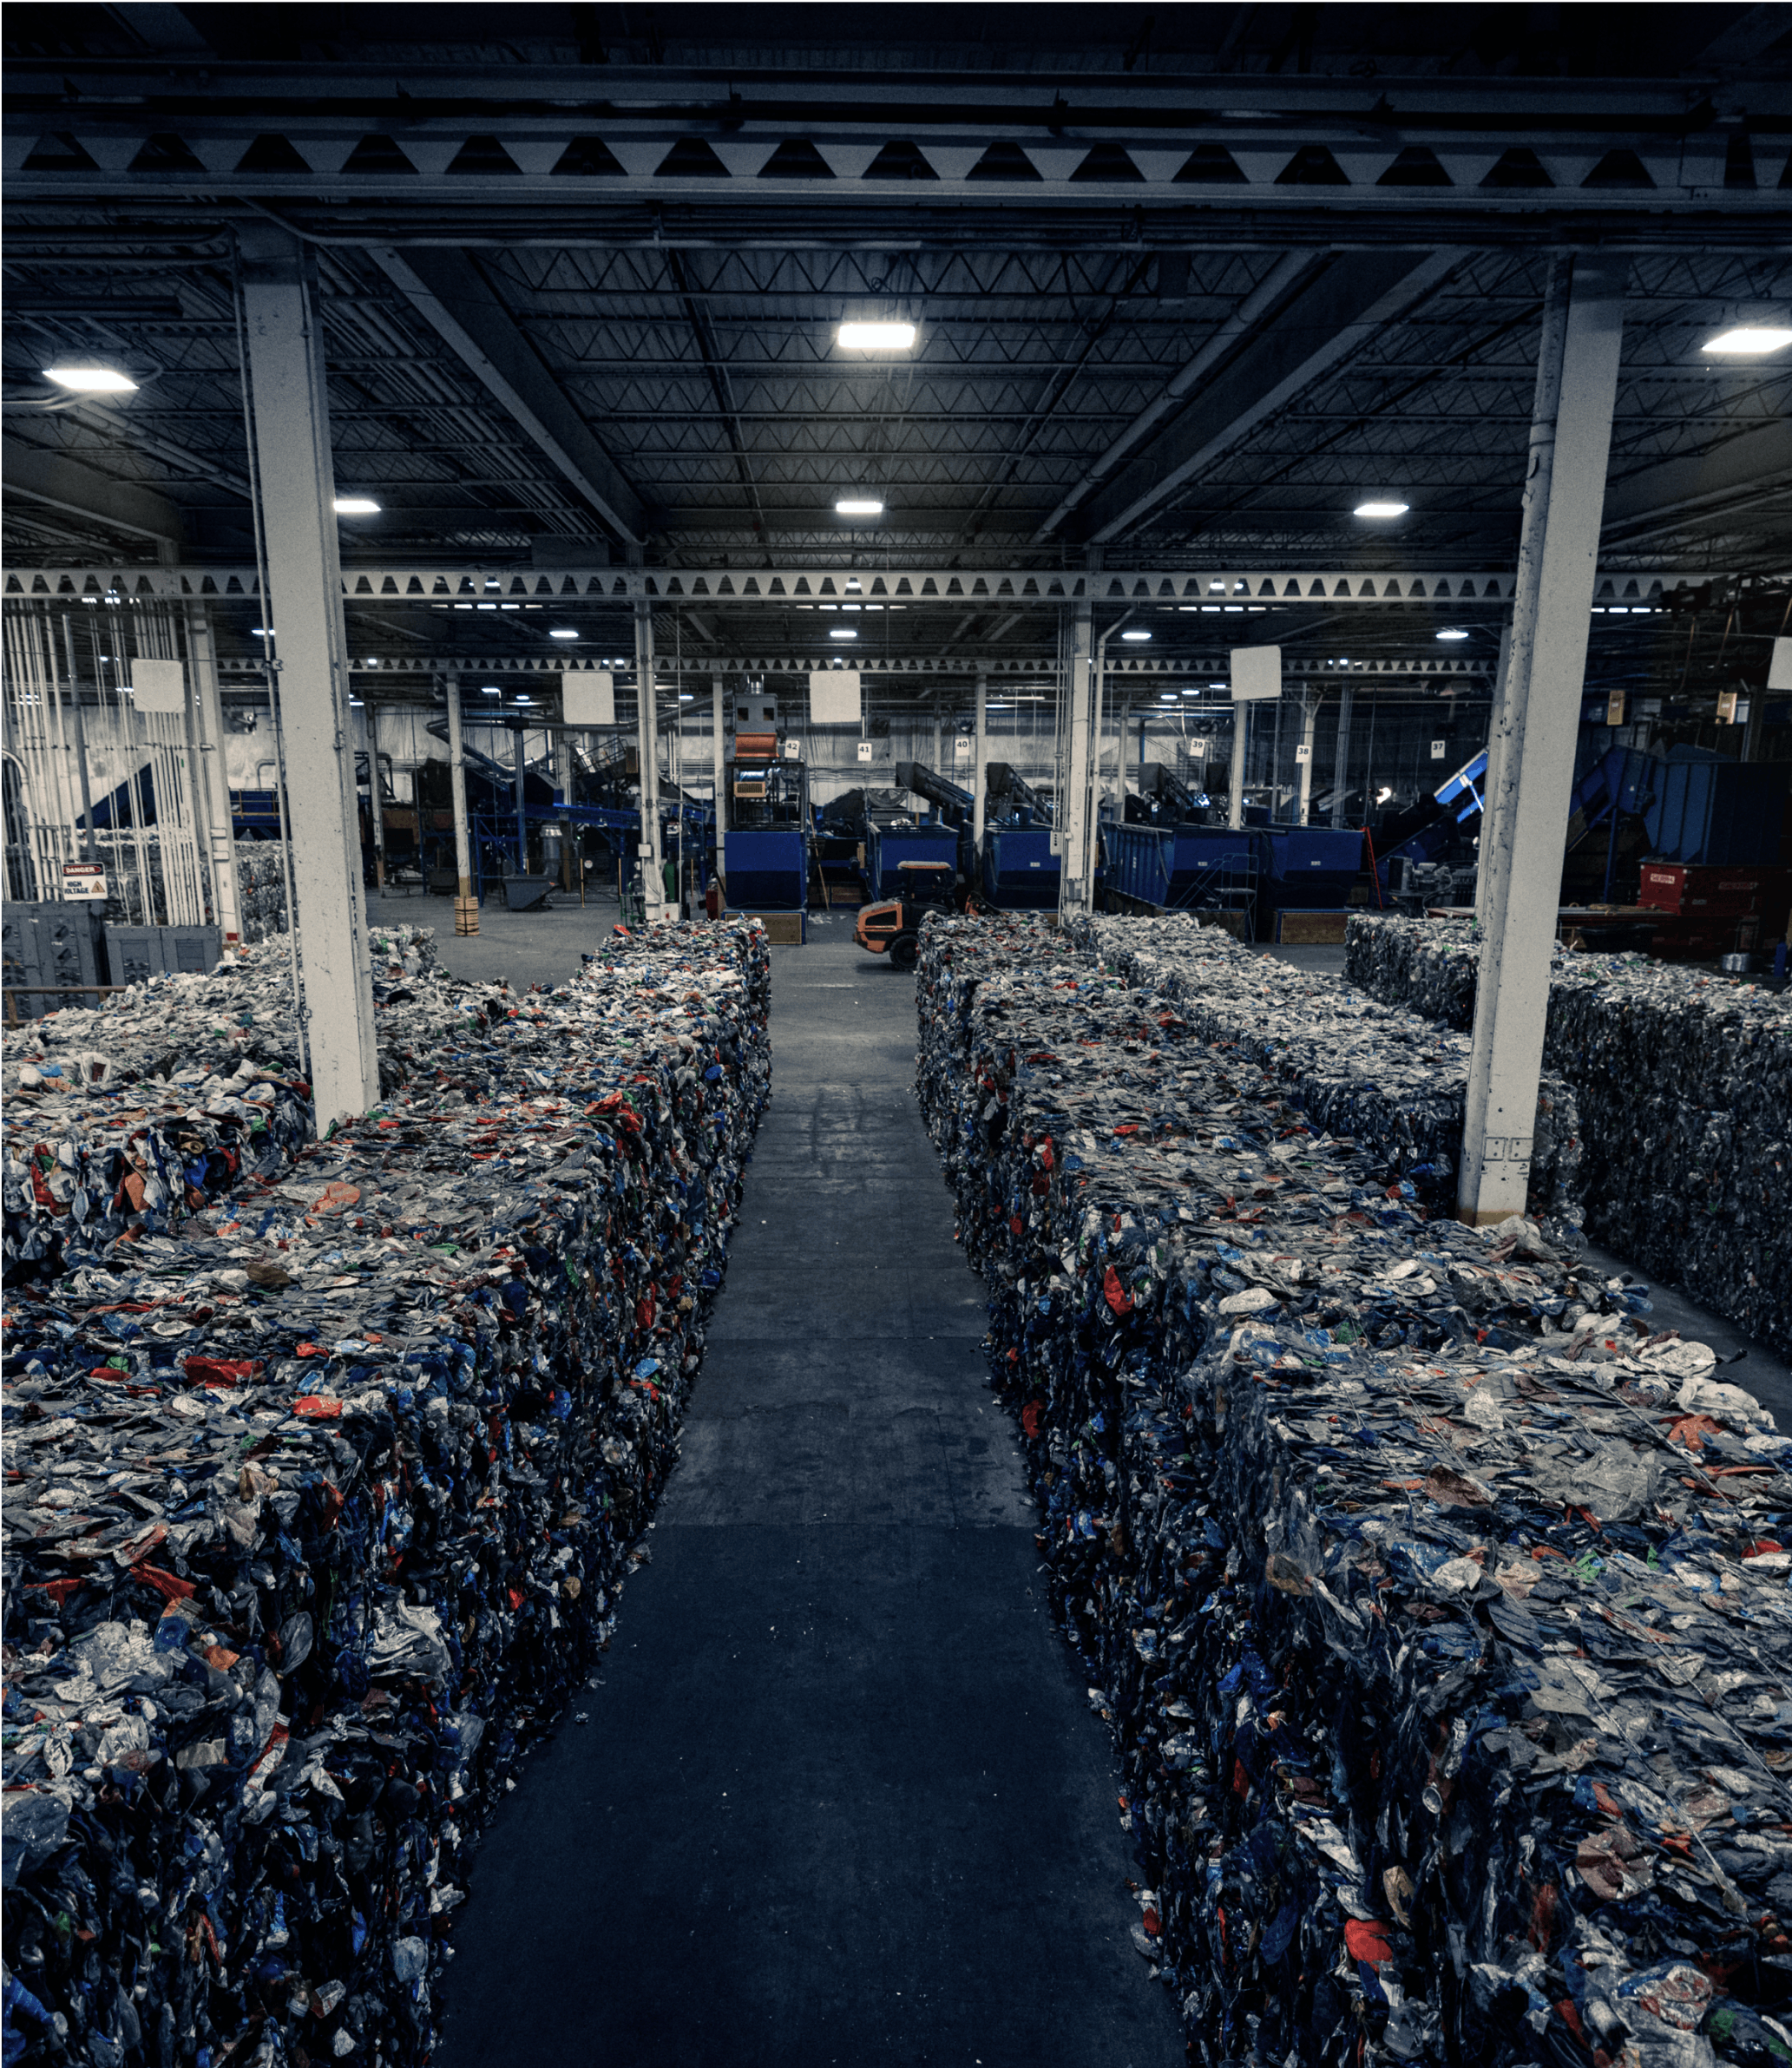 Rows of sorted recycled materials in bales inside of a waste facility.